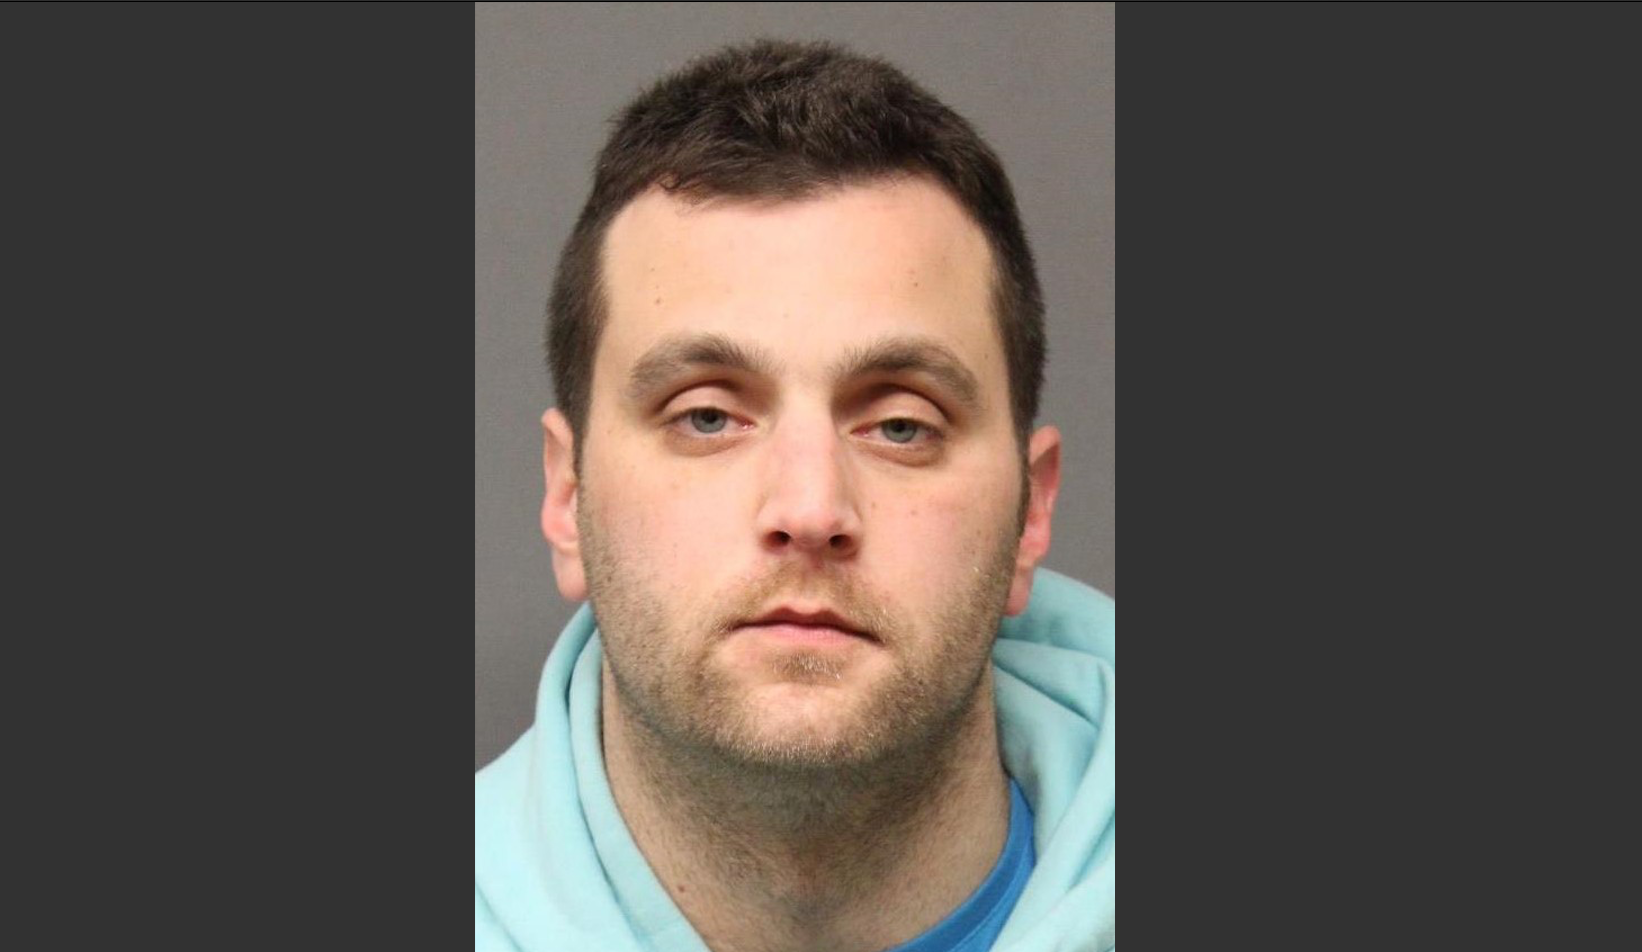 Township man adds child porn to his list of charges over meth, Xanax, GHB â€”  Pascack Press & Northern Valley Press